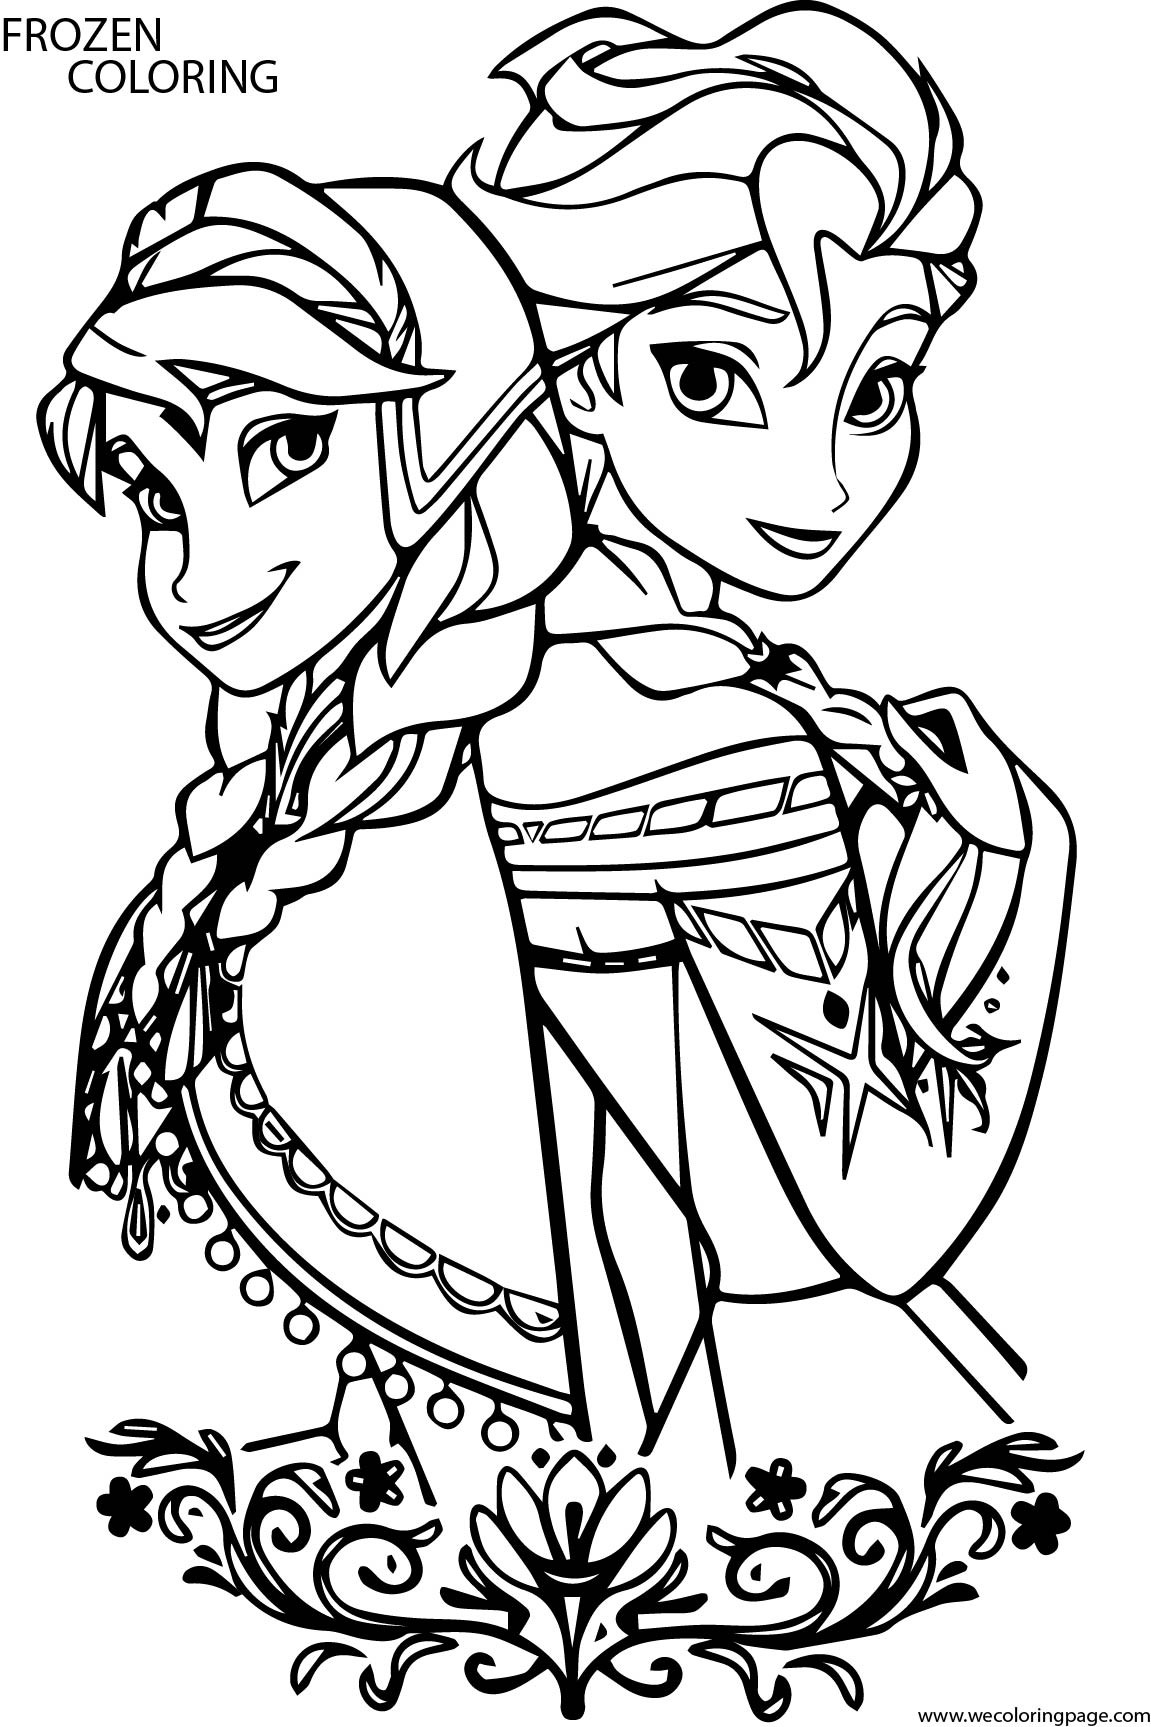 Frozen Coloring Books For Kids
 WeColoringPage Frozen